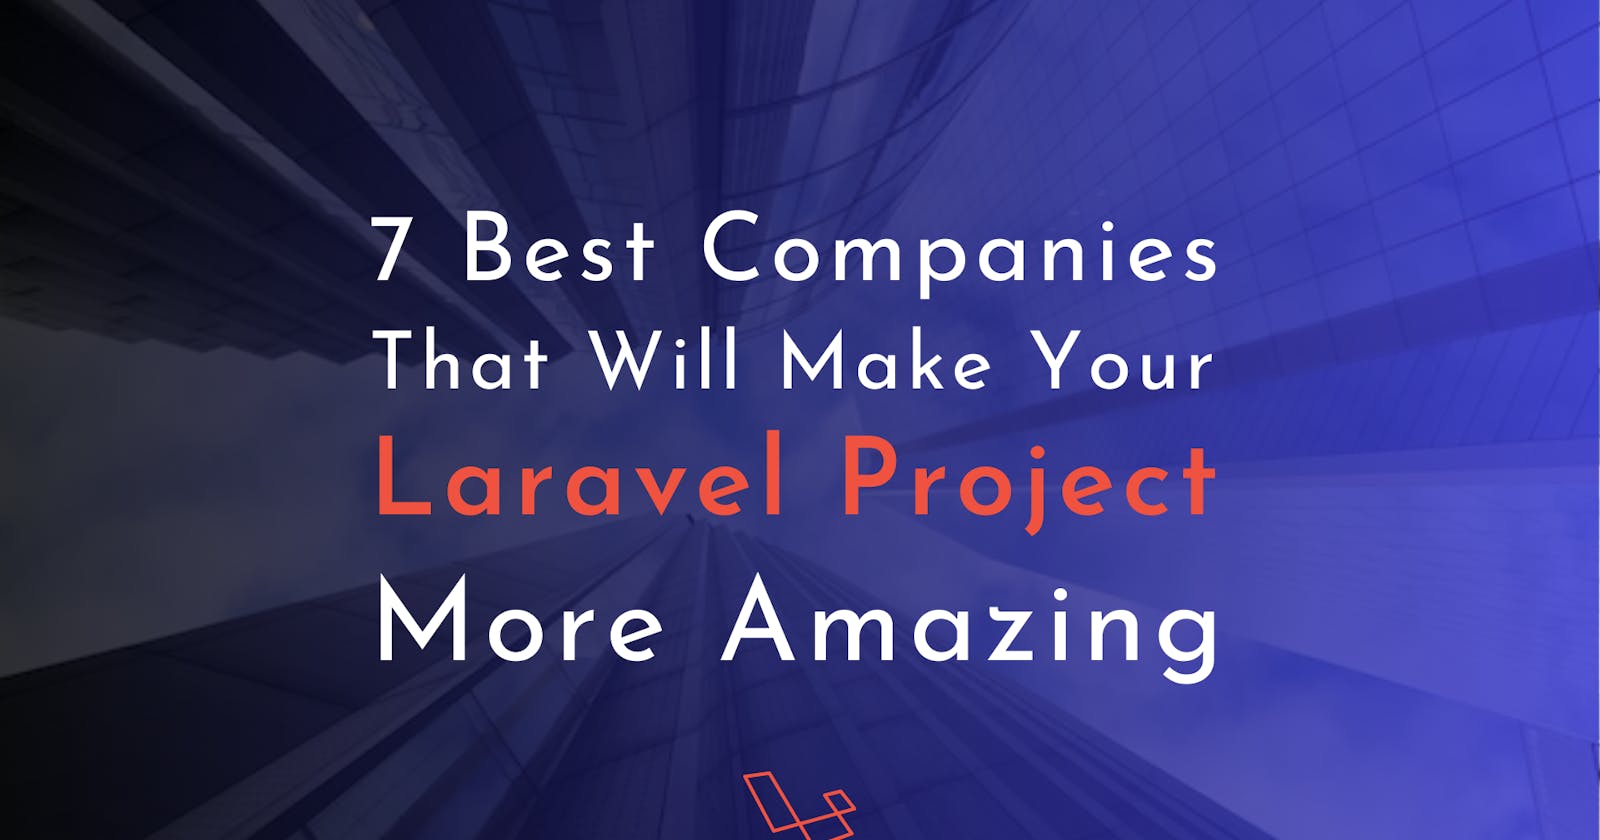 7 Best Companies That Will Make Your Laravel Project More Amazing ✨